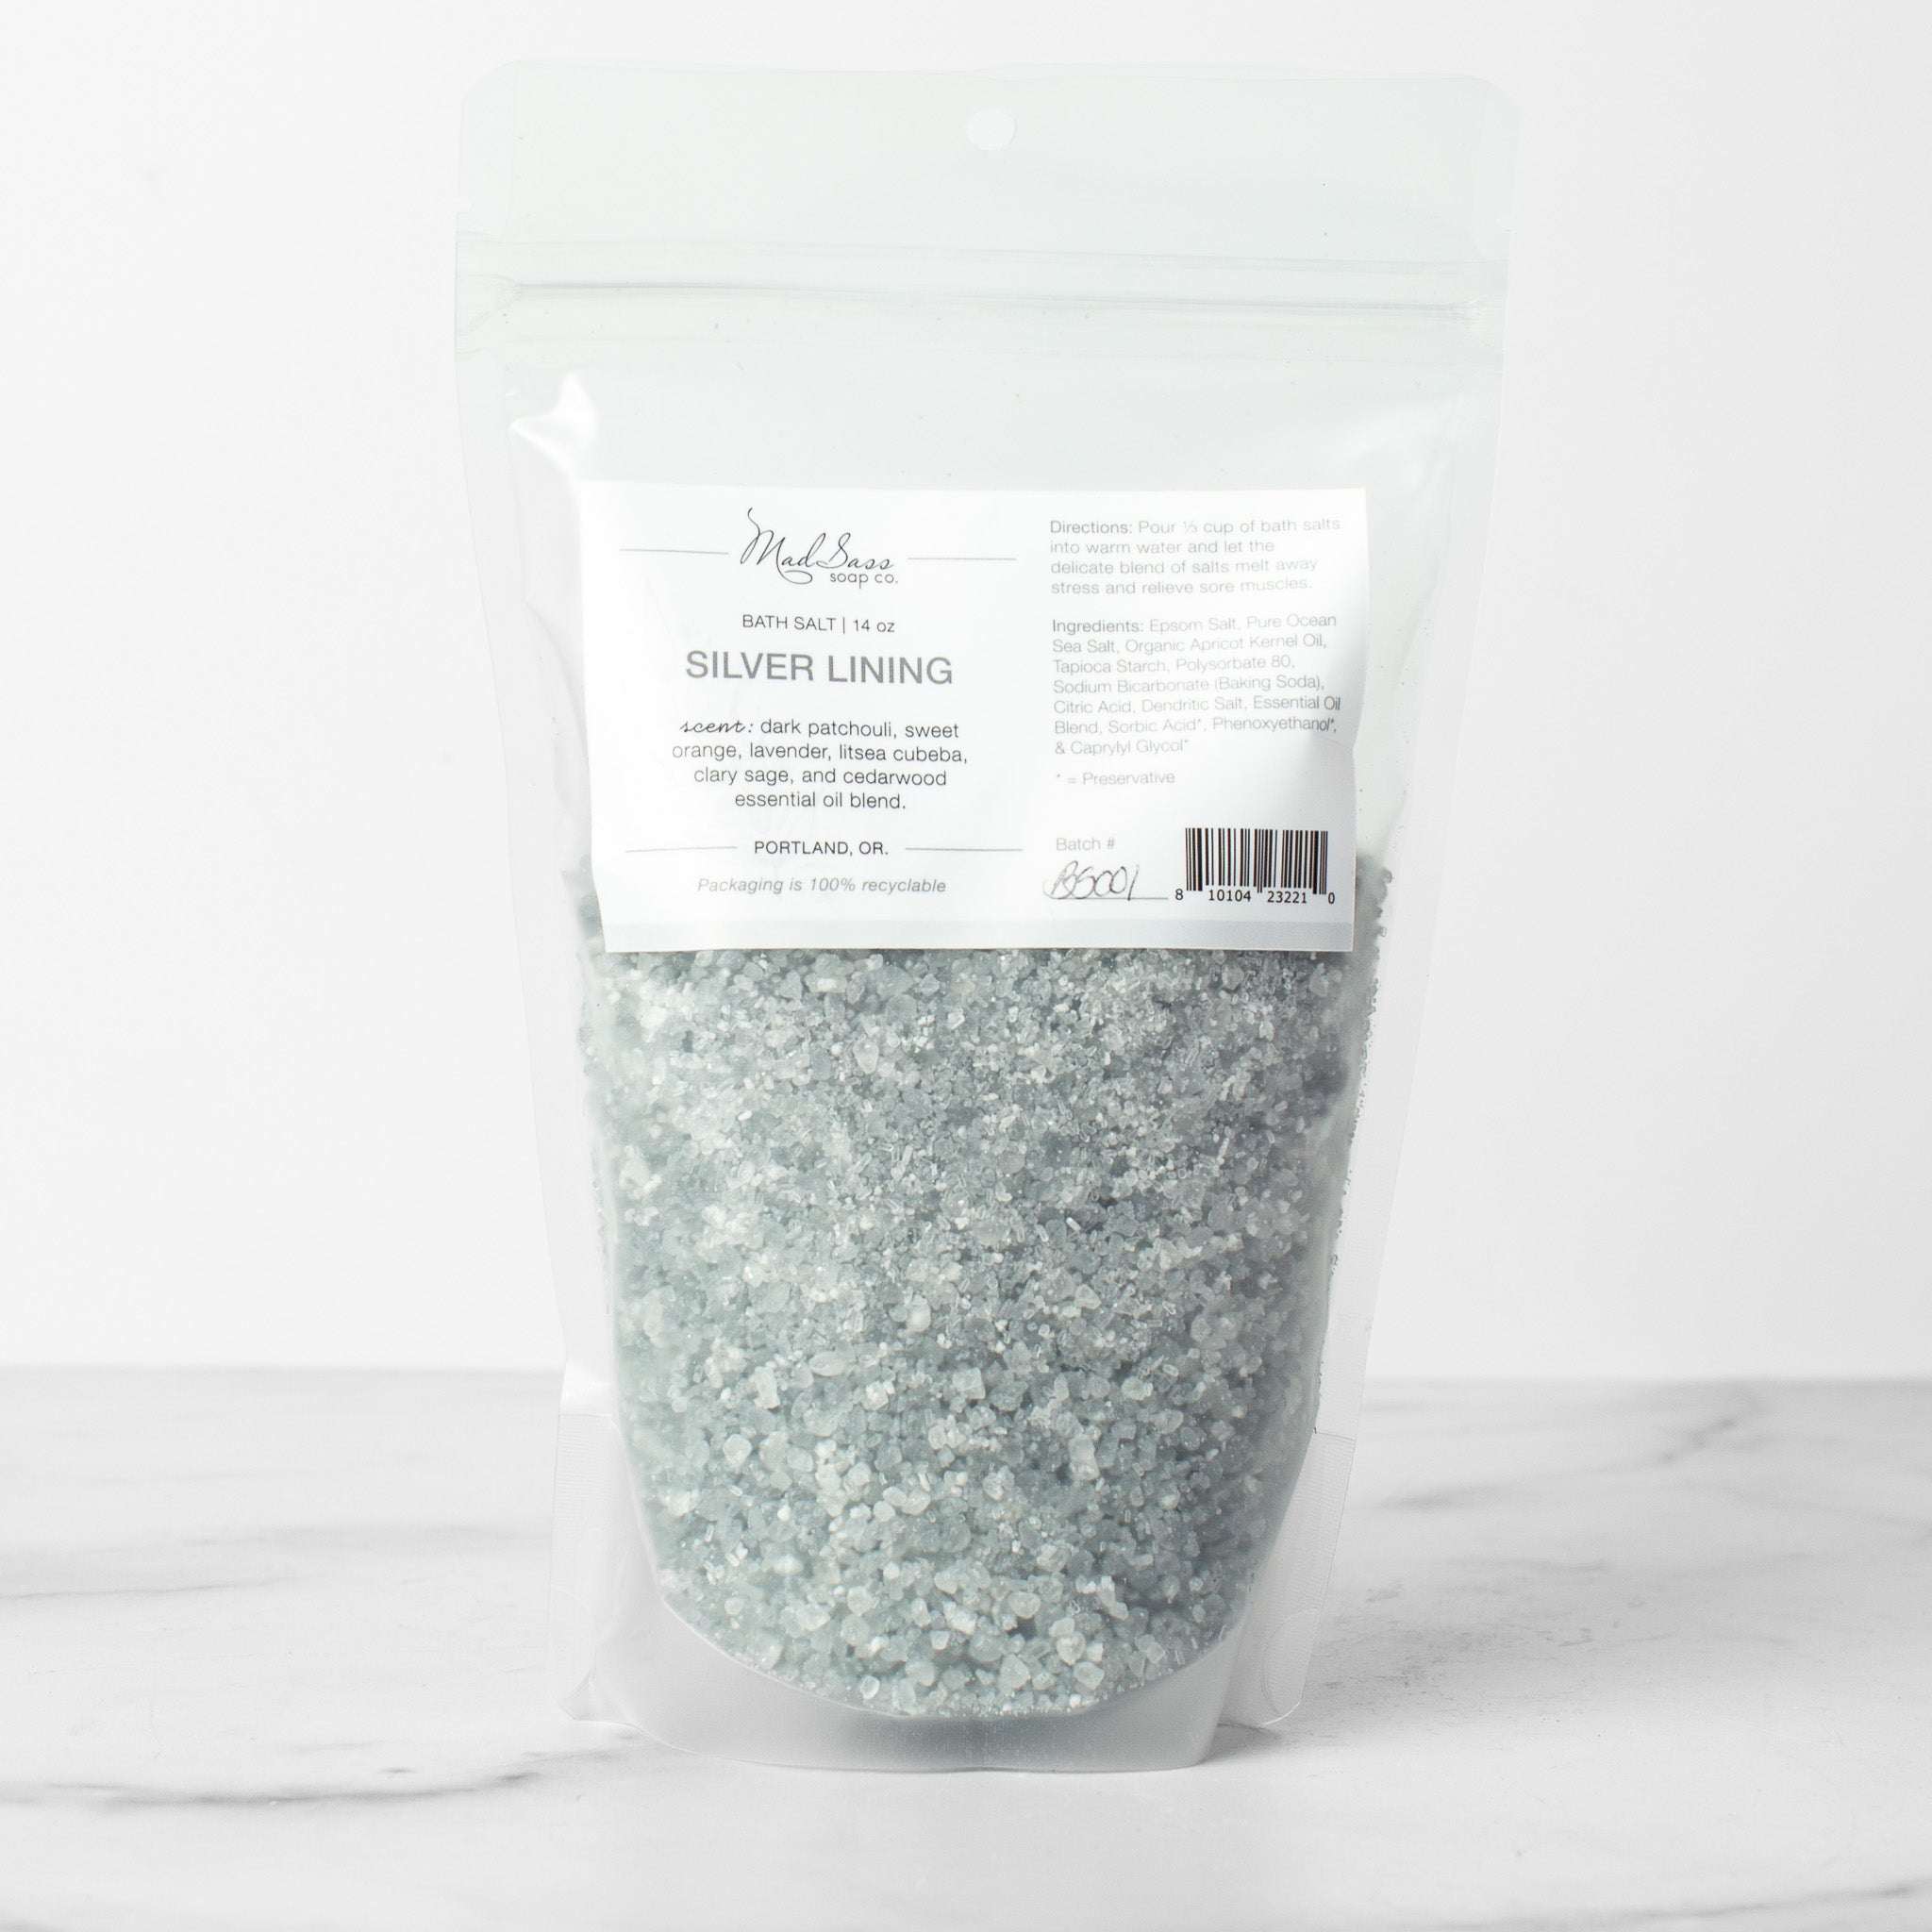 One bag of Silver Lining bath salts on a white background. Silver Lining is a mixed grey and white bath salt.